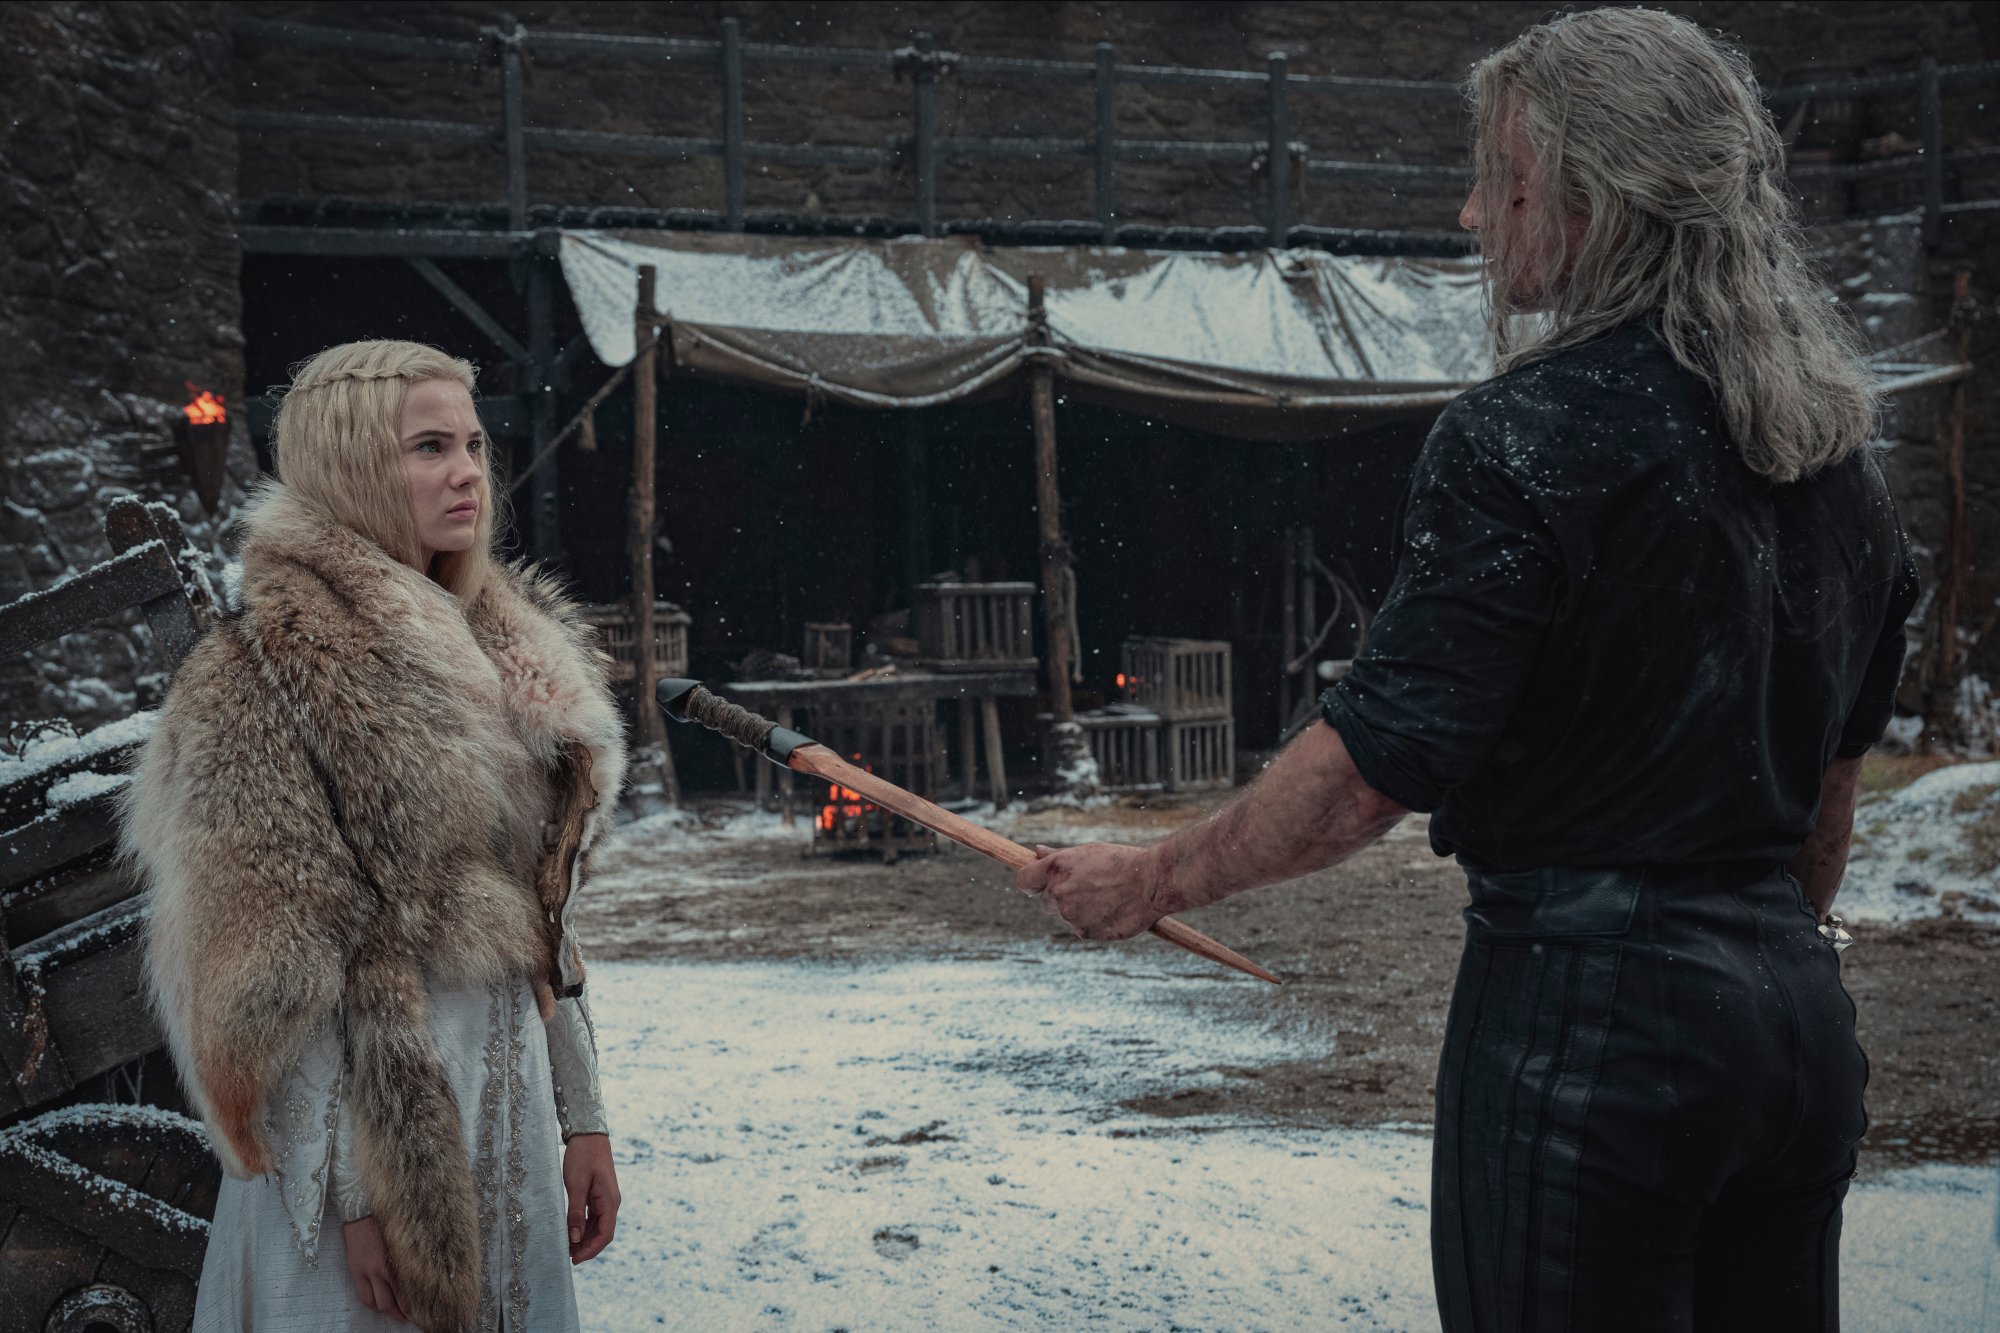 Freya Allen and Henry Cavill in 'The Witcher' Season 2. She's standing in the snow, and he's holding a blade out to her.